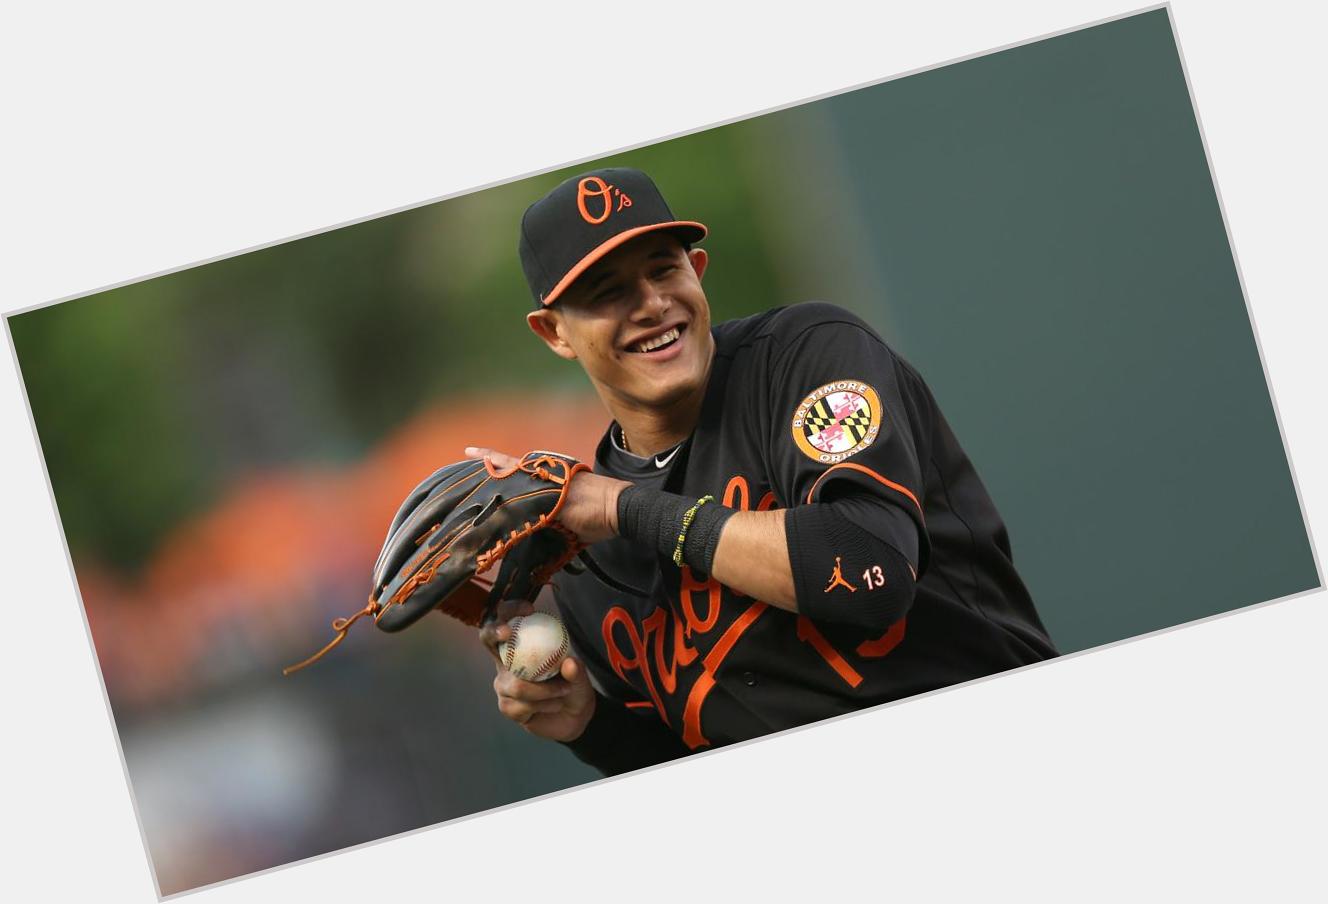 This guy turns 23 today! REmessage to wish Manny Machado a happy birthday! 